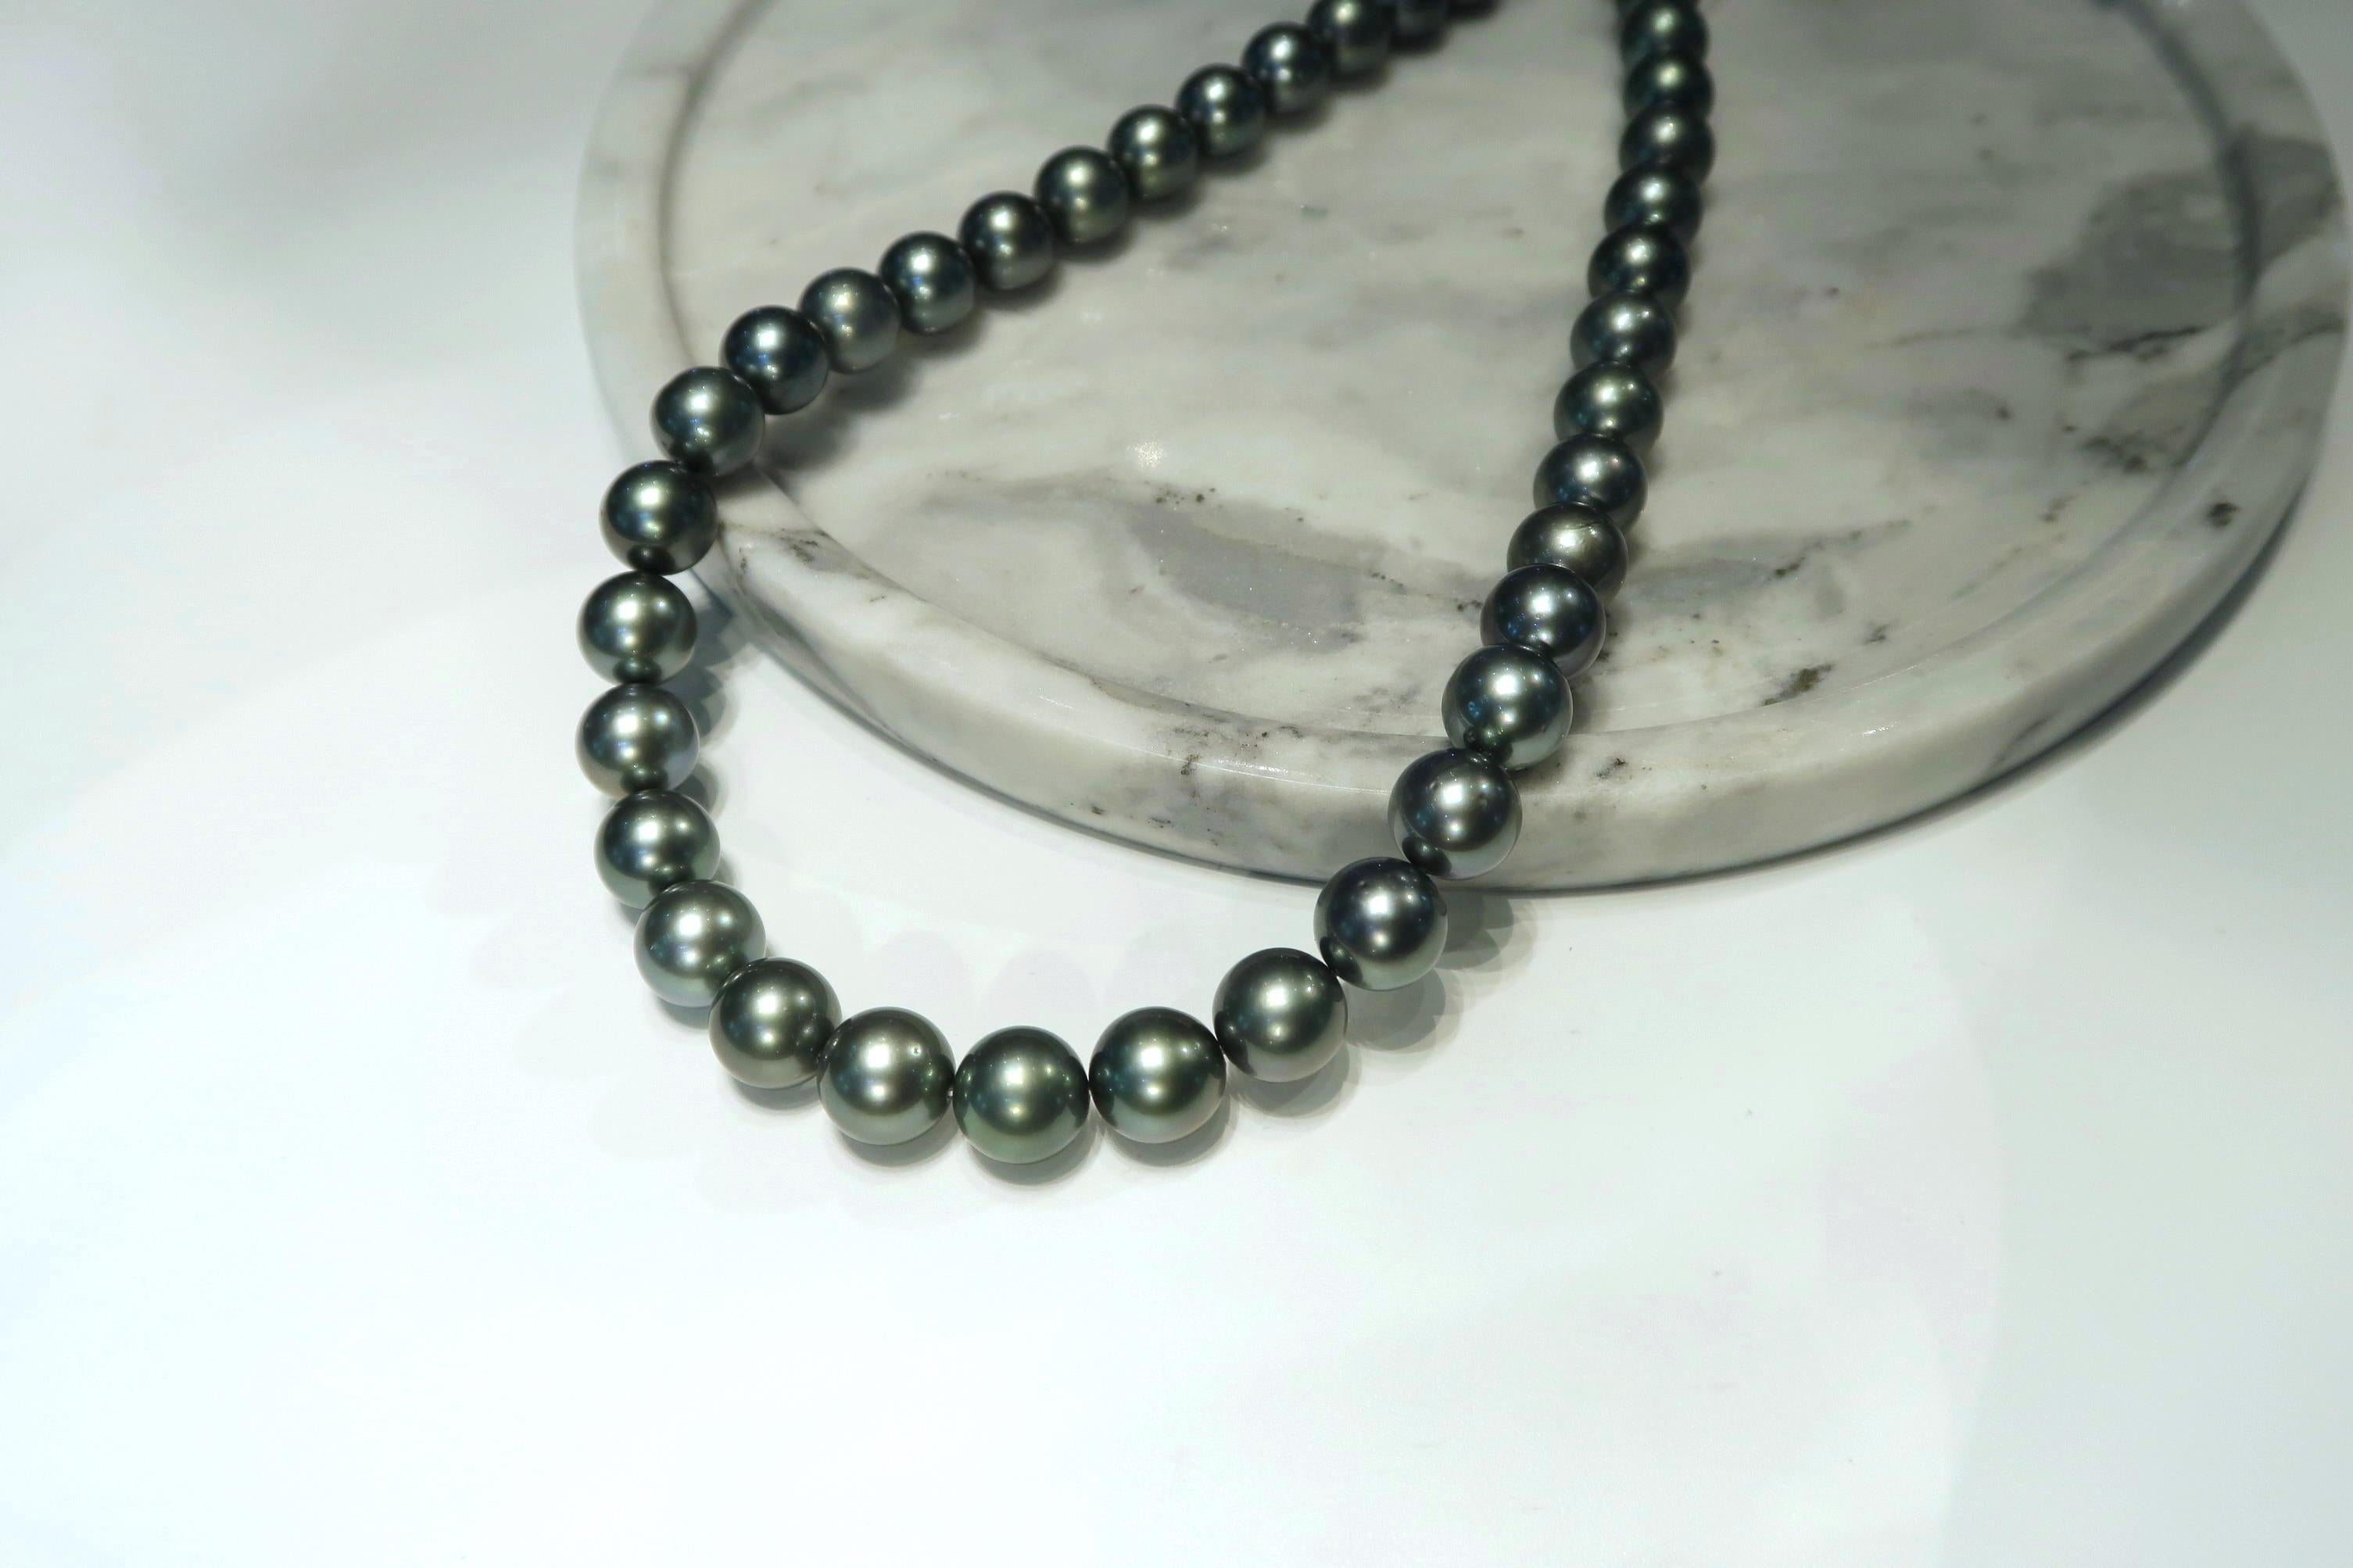 Lustrous Blue-Tinted Tahitian Pearl Necklace.

Pearl: 38 pieces, Blue-Tinted Tahitian, 10-12 mm
Length: 16 inches

Please see Customisation for stringing options.